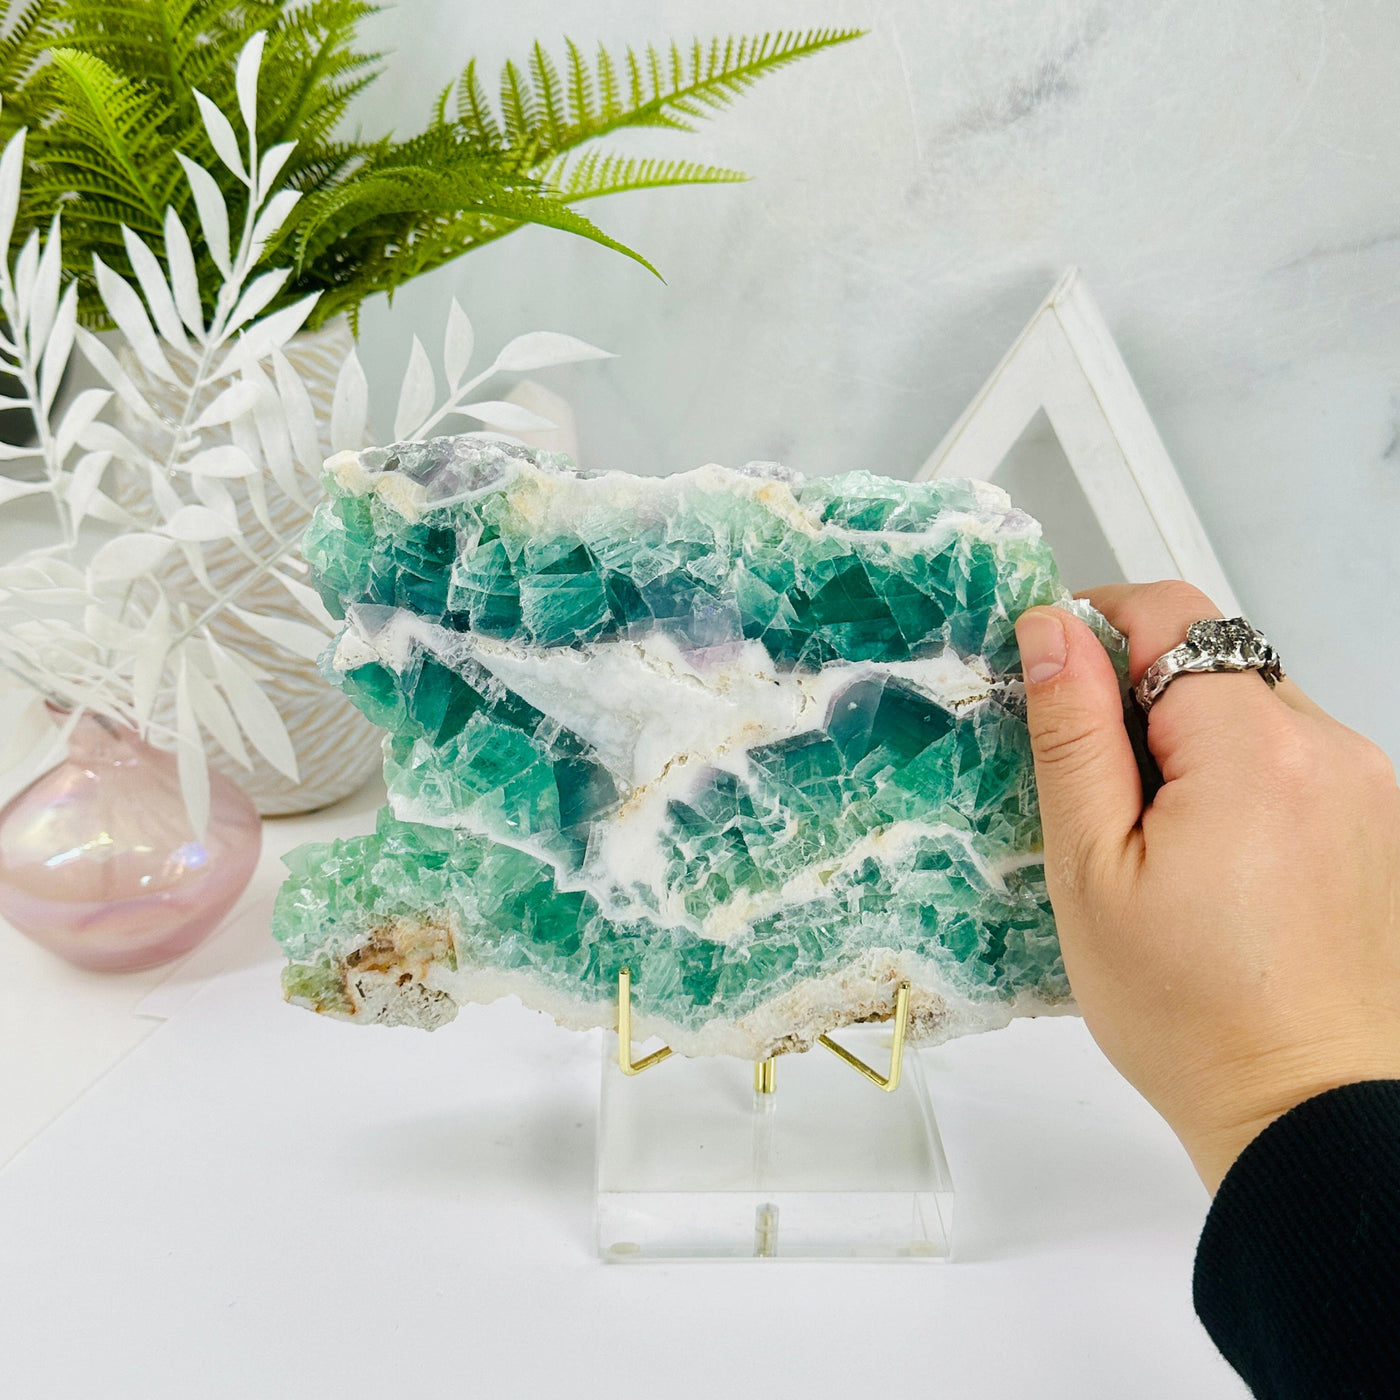 Fluorite Crystal Slab - Platter - OOAK - with hand for size reference